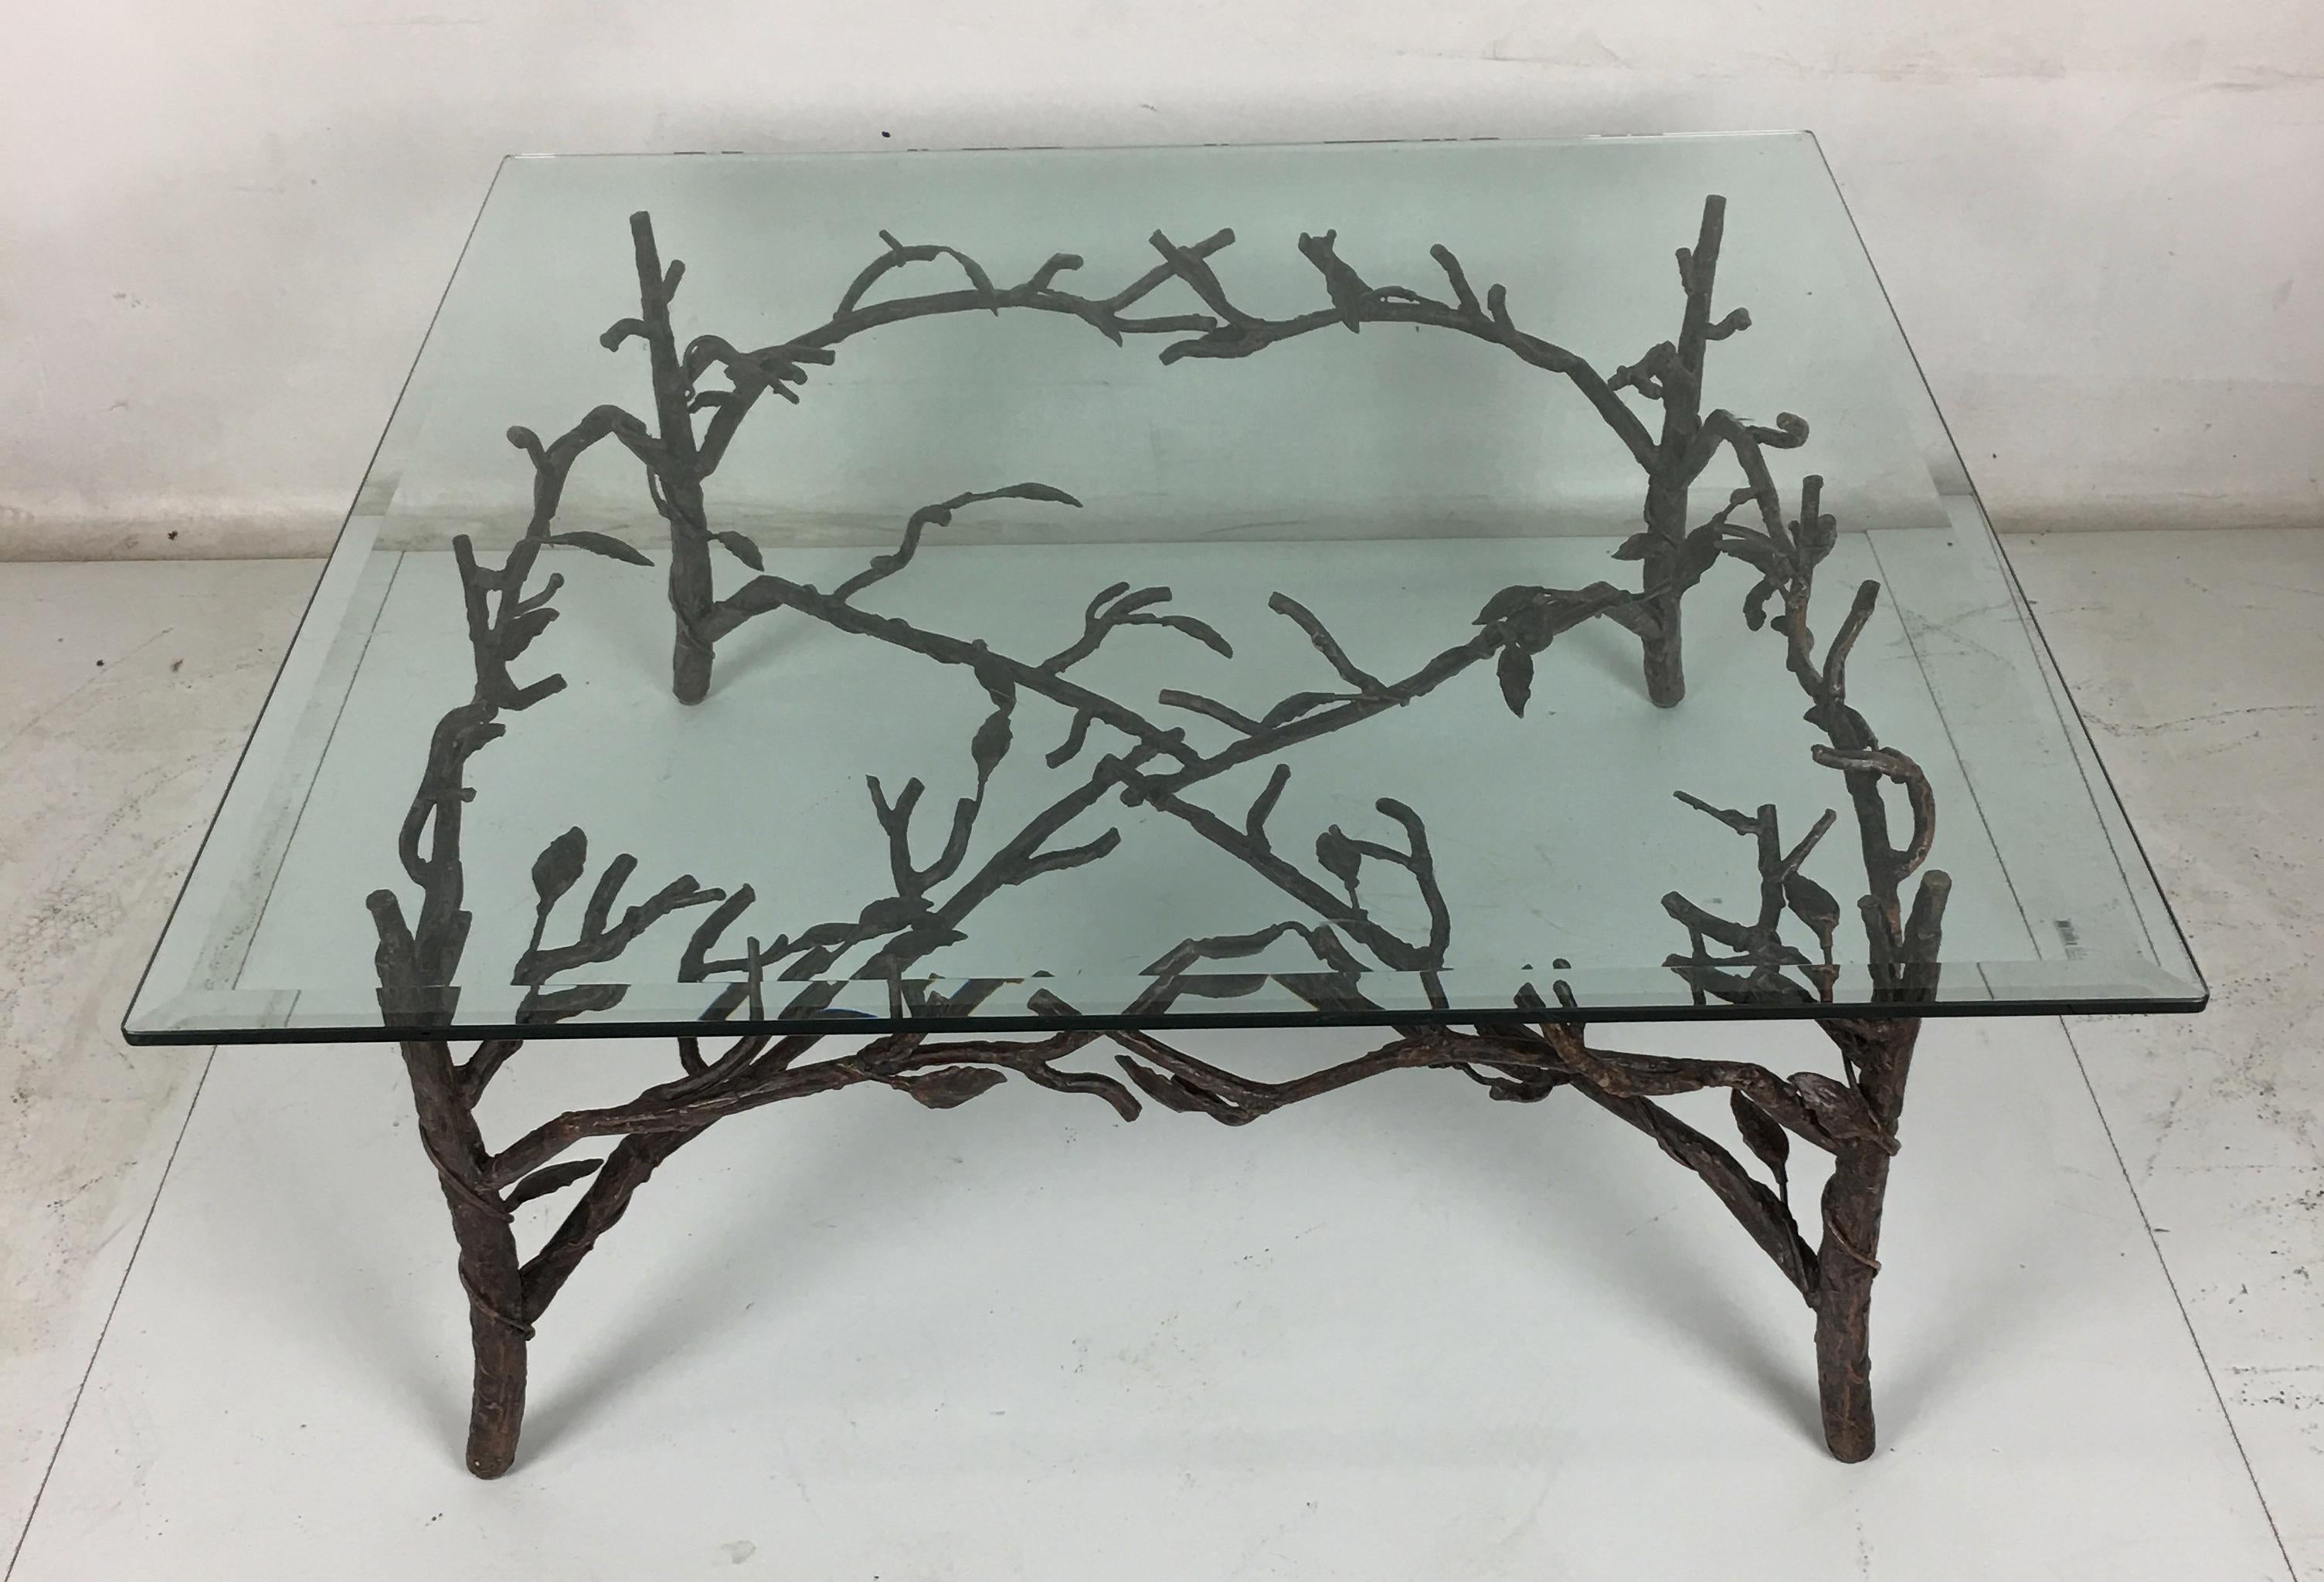 Chic faux bois coffee table in patinated metal with vined branches and leaves in the style of Diego Giacometti. The table is shown with a 36